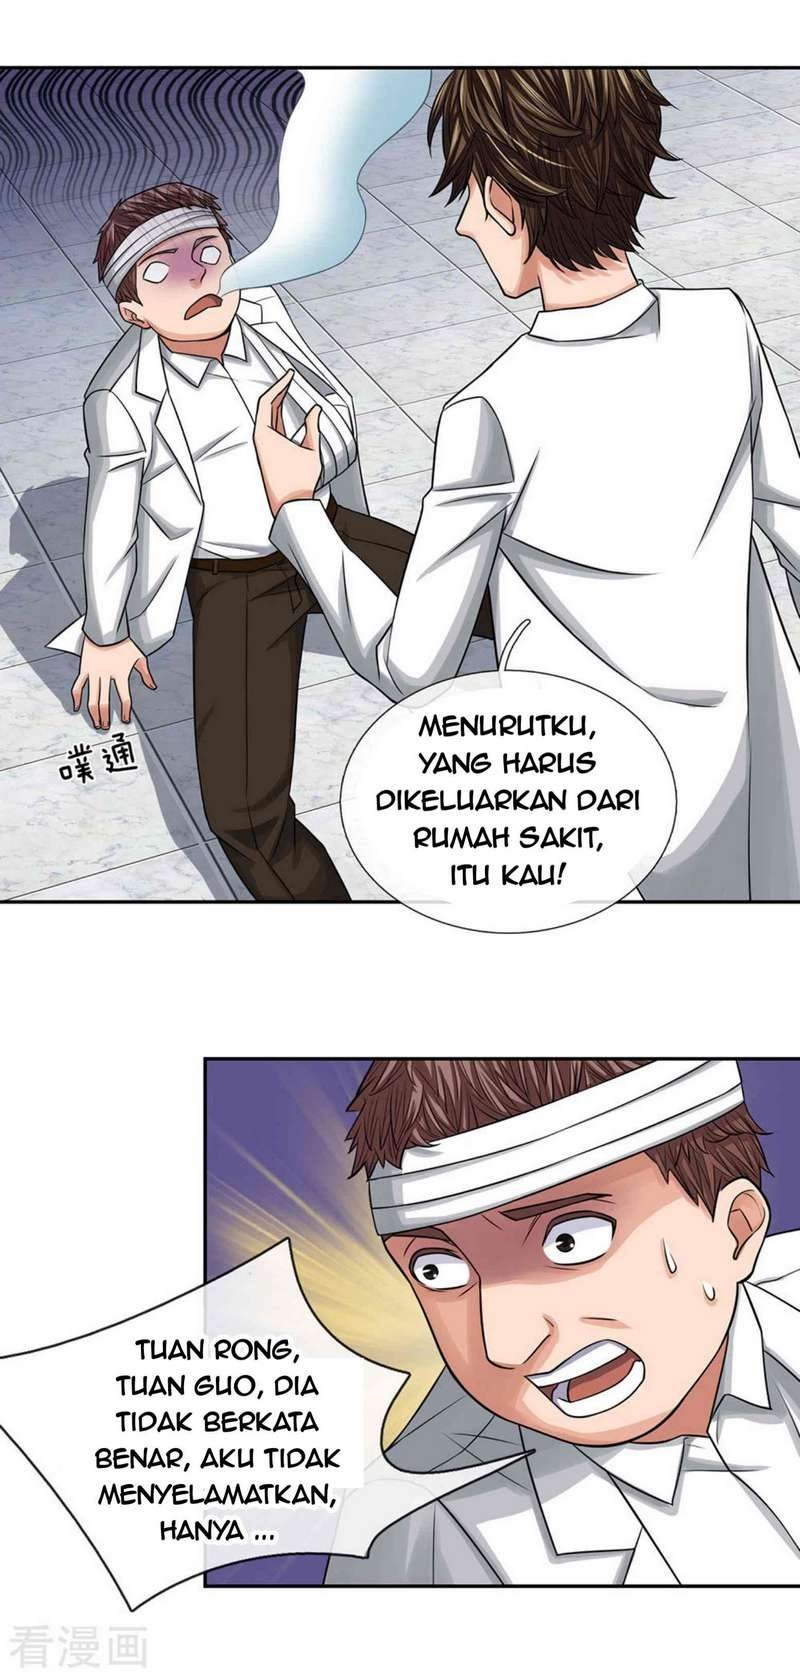 Super Medical Fairy in The City Chapter 30